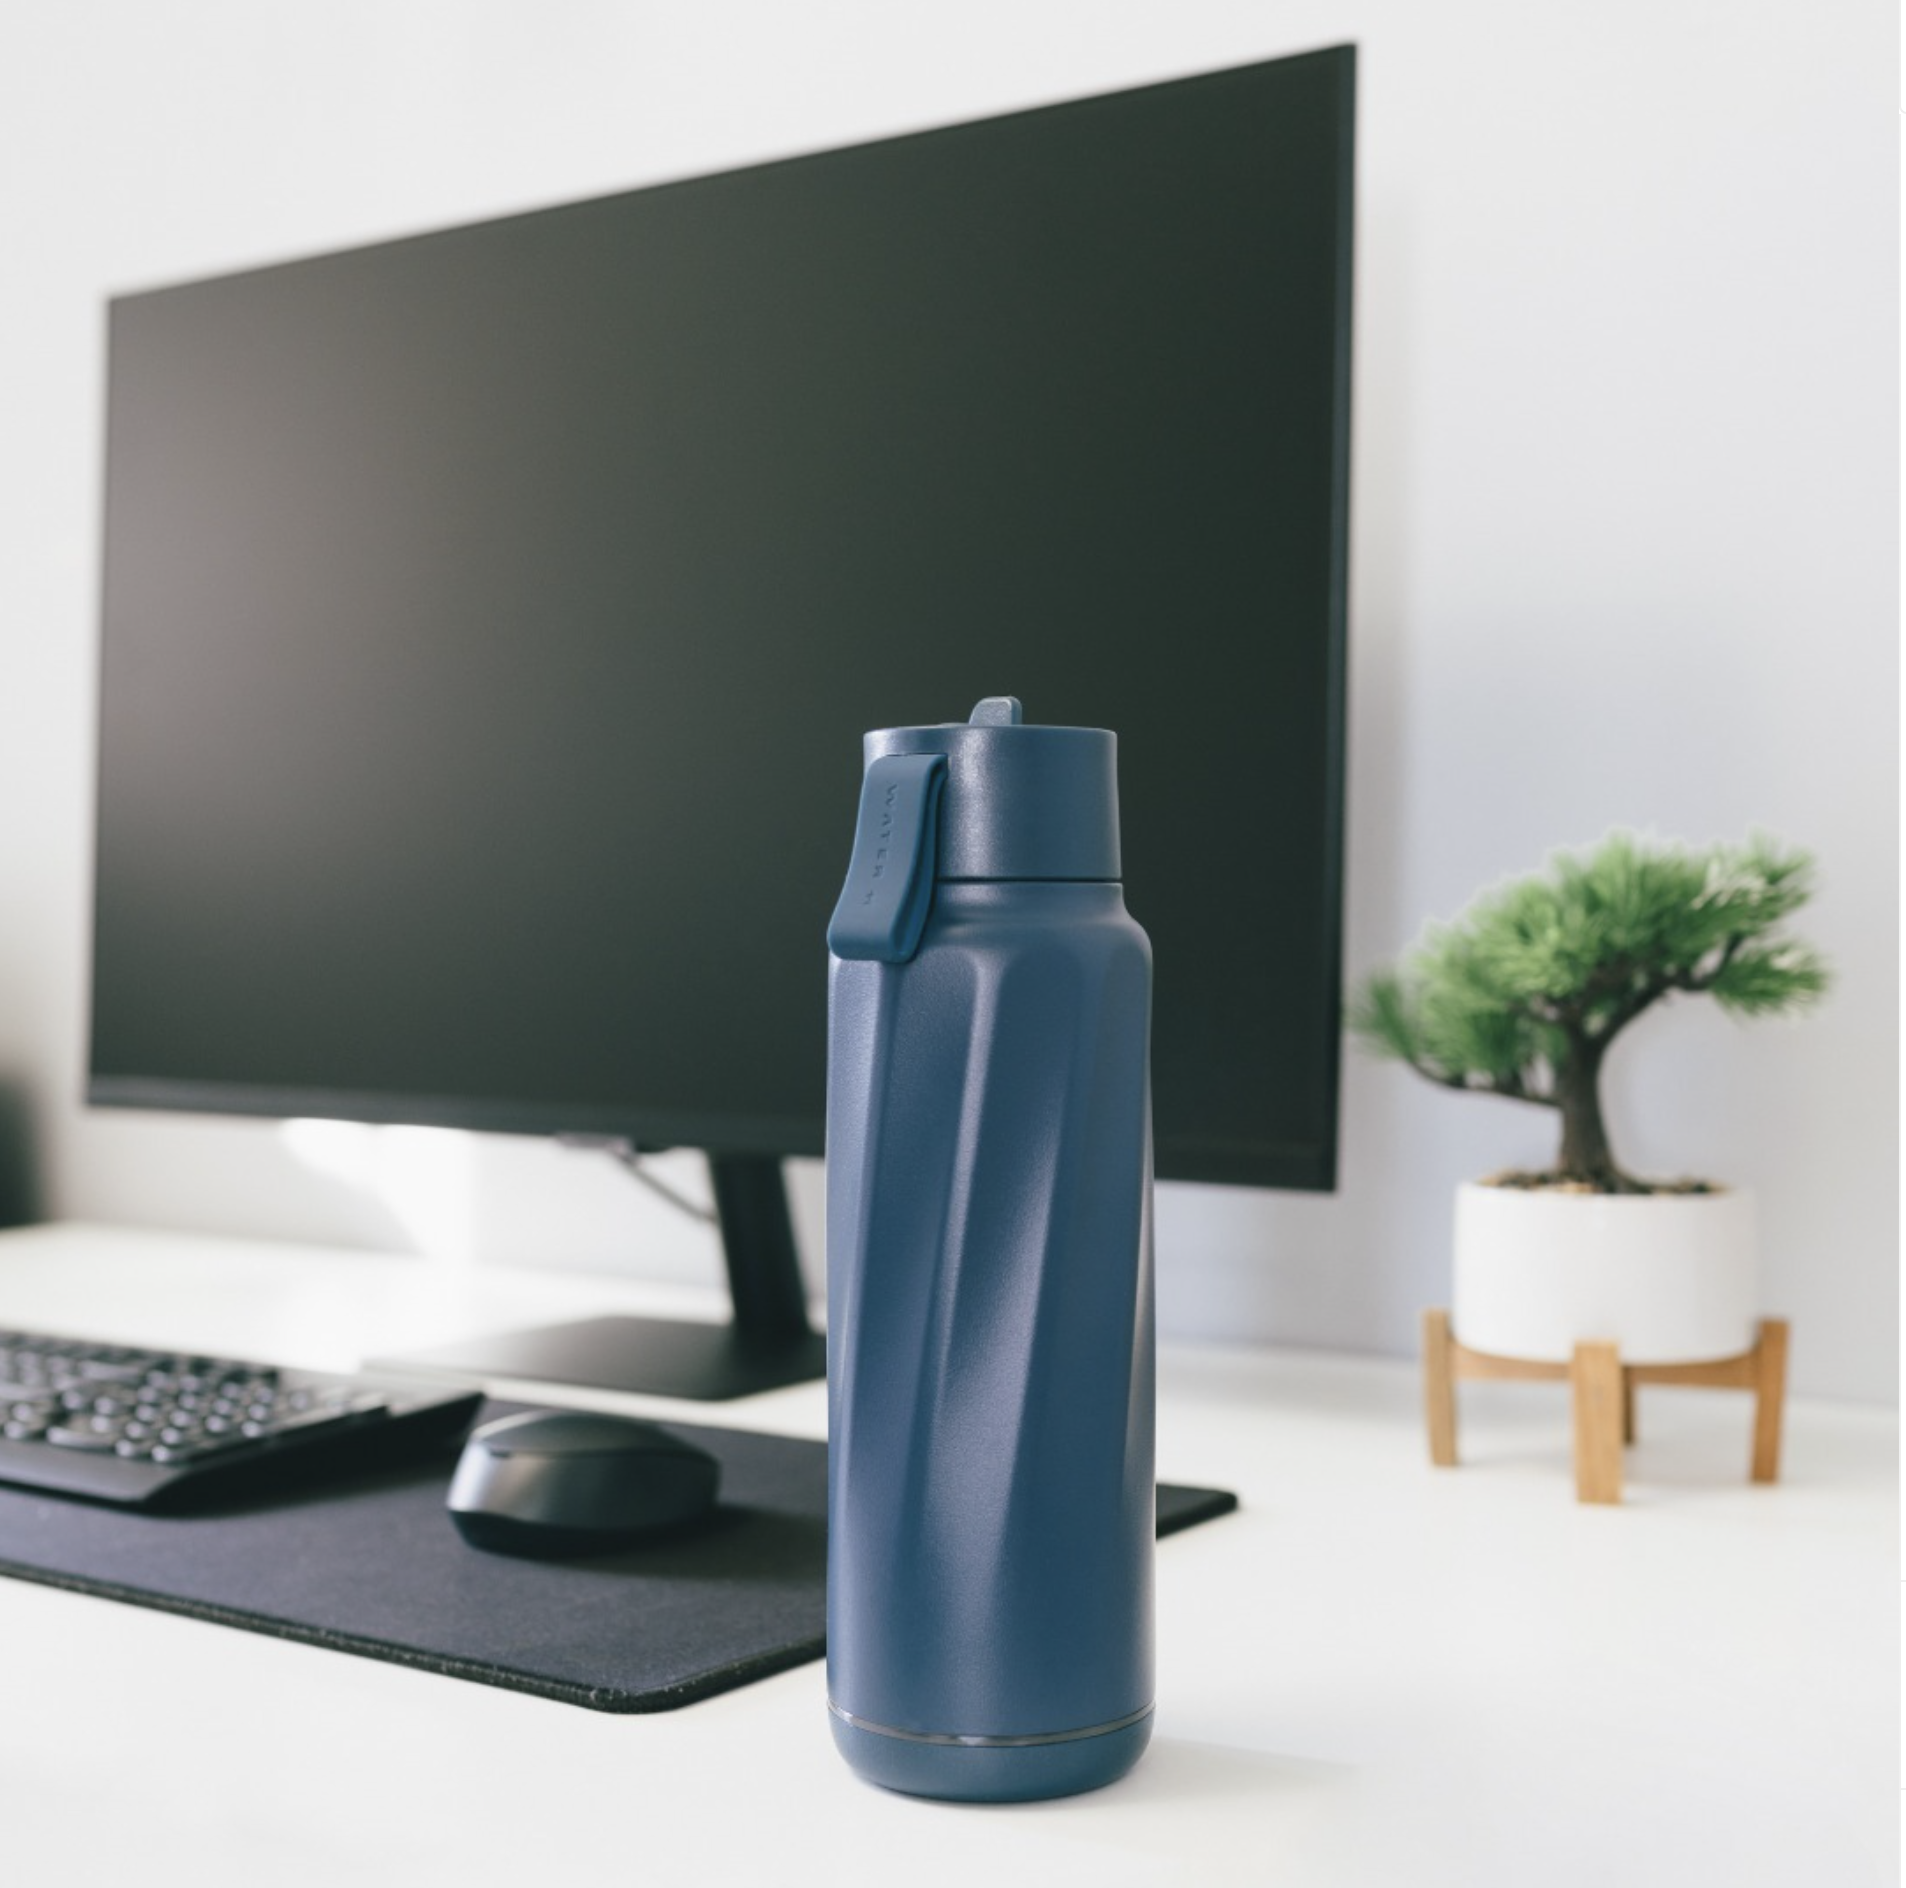 A blue insulated bottle placed on a desk in front of a computer monitor with a keyboard, and a mouse accompanied by a small potted plant.